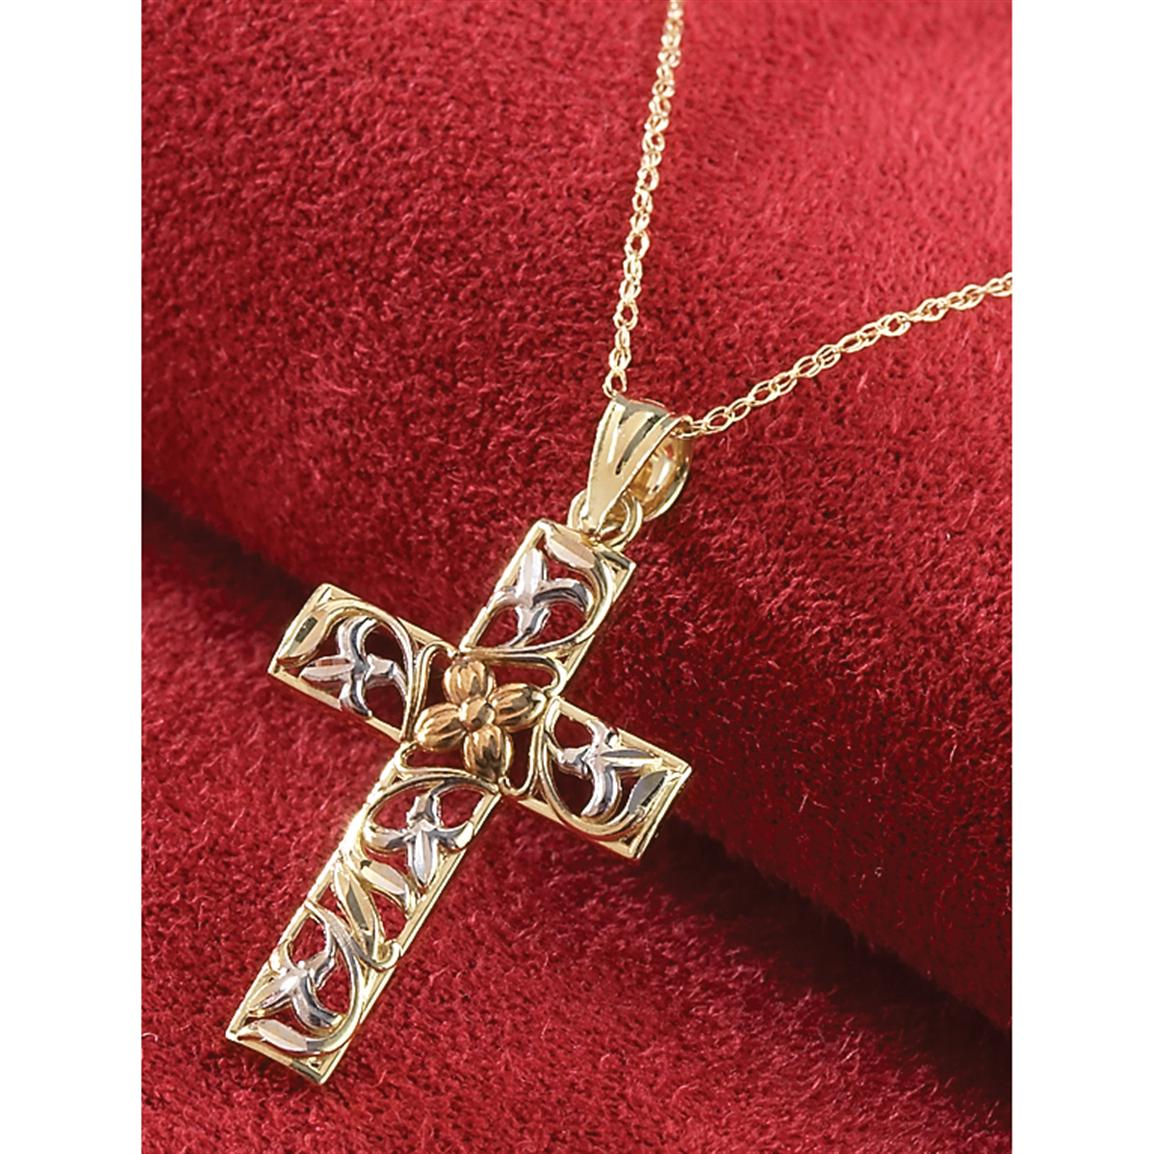 10K Tri - color Gold Cross Necklace - 188407, Jewelry at Sportsman's Guide